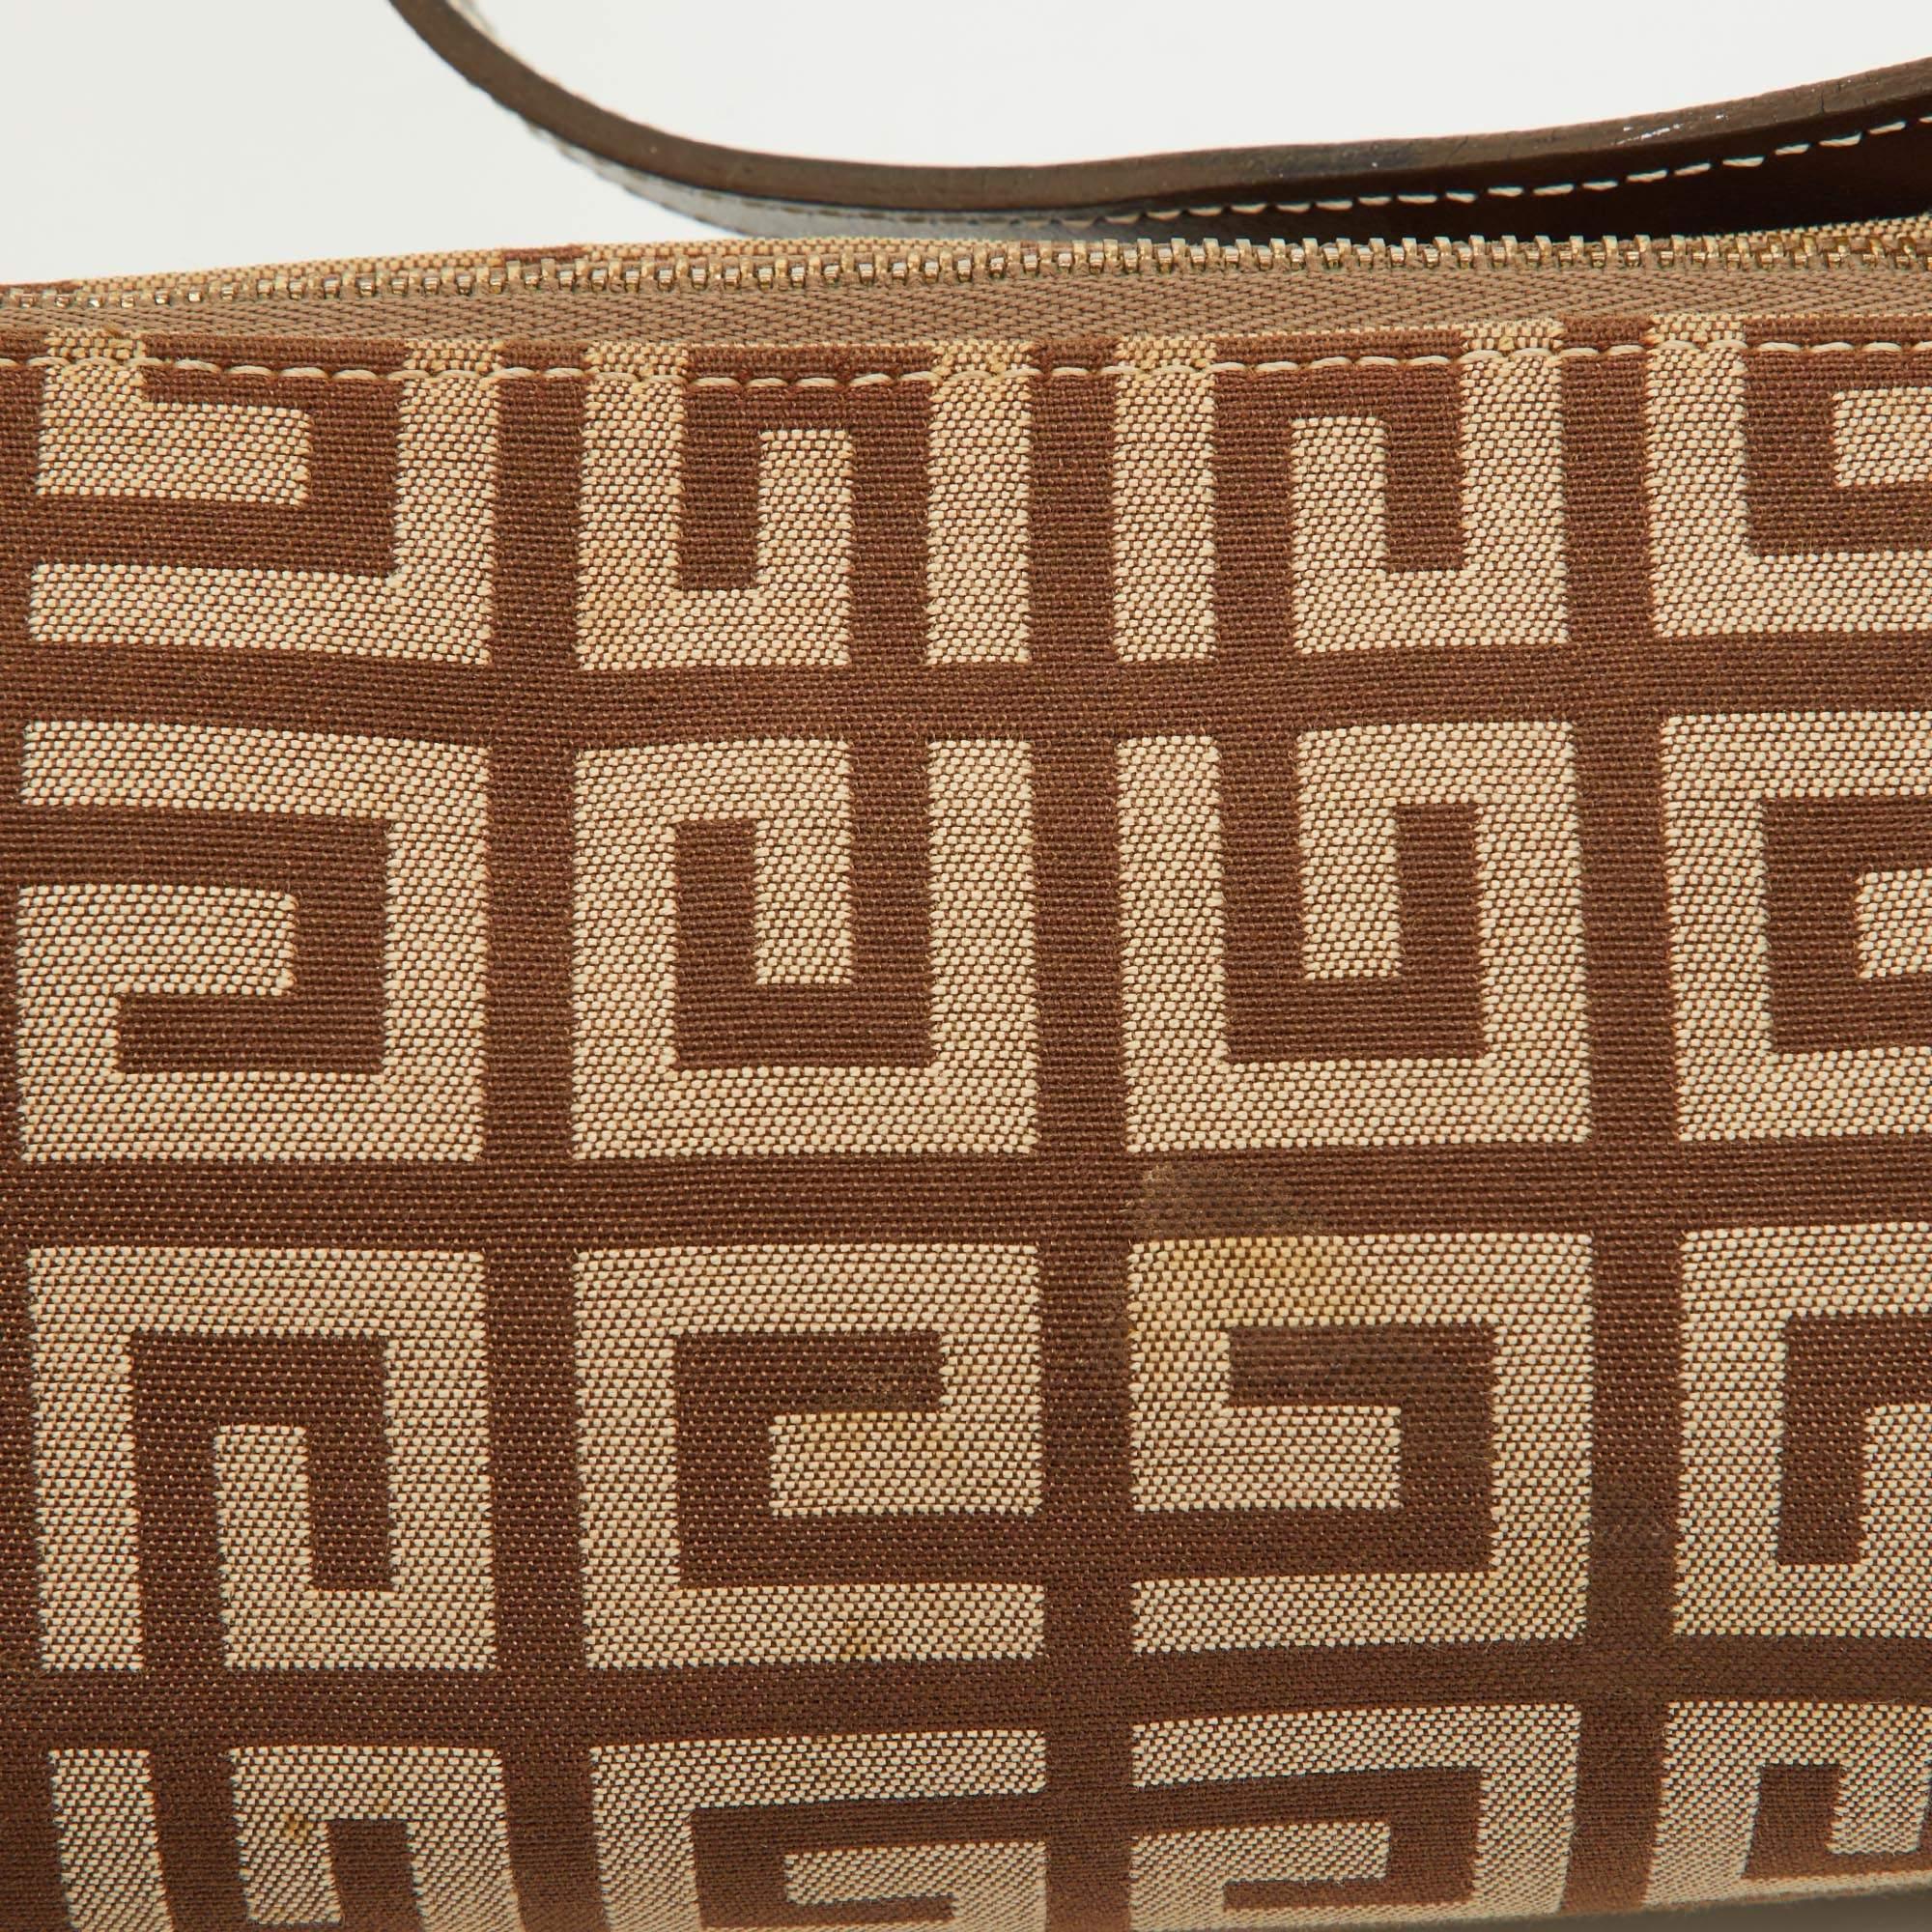 Givenchy Beige/Brown Monogram Canvas and Leather Bag In Good Condition For Sale In Dubai, Al Qouz 2